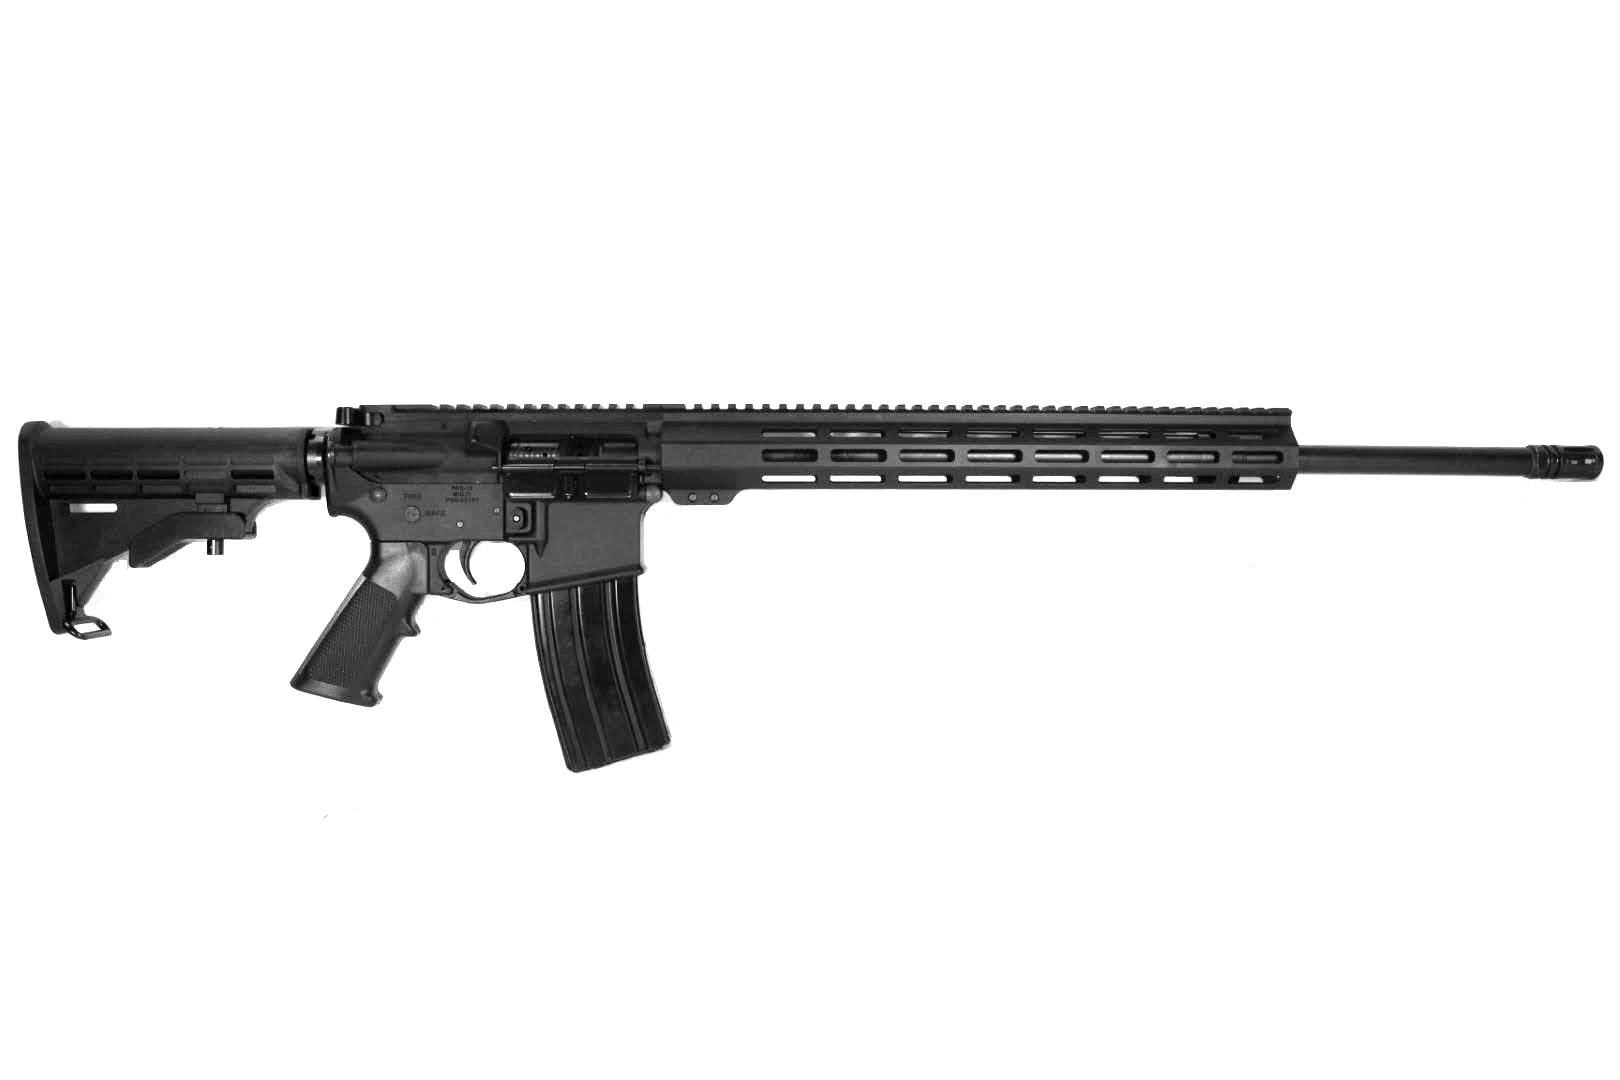 Pro2A Tactical's Patriot Line - 22 inch AR-15 224 Valkyrie Rifle Length M-LOK Rifle 